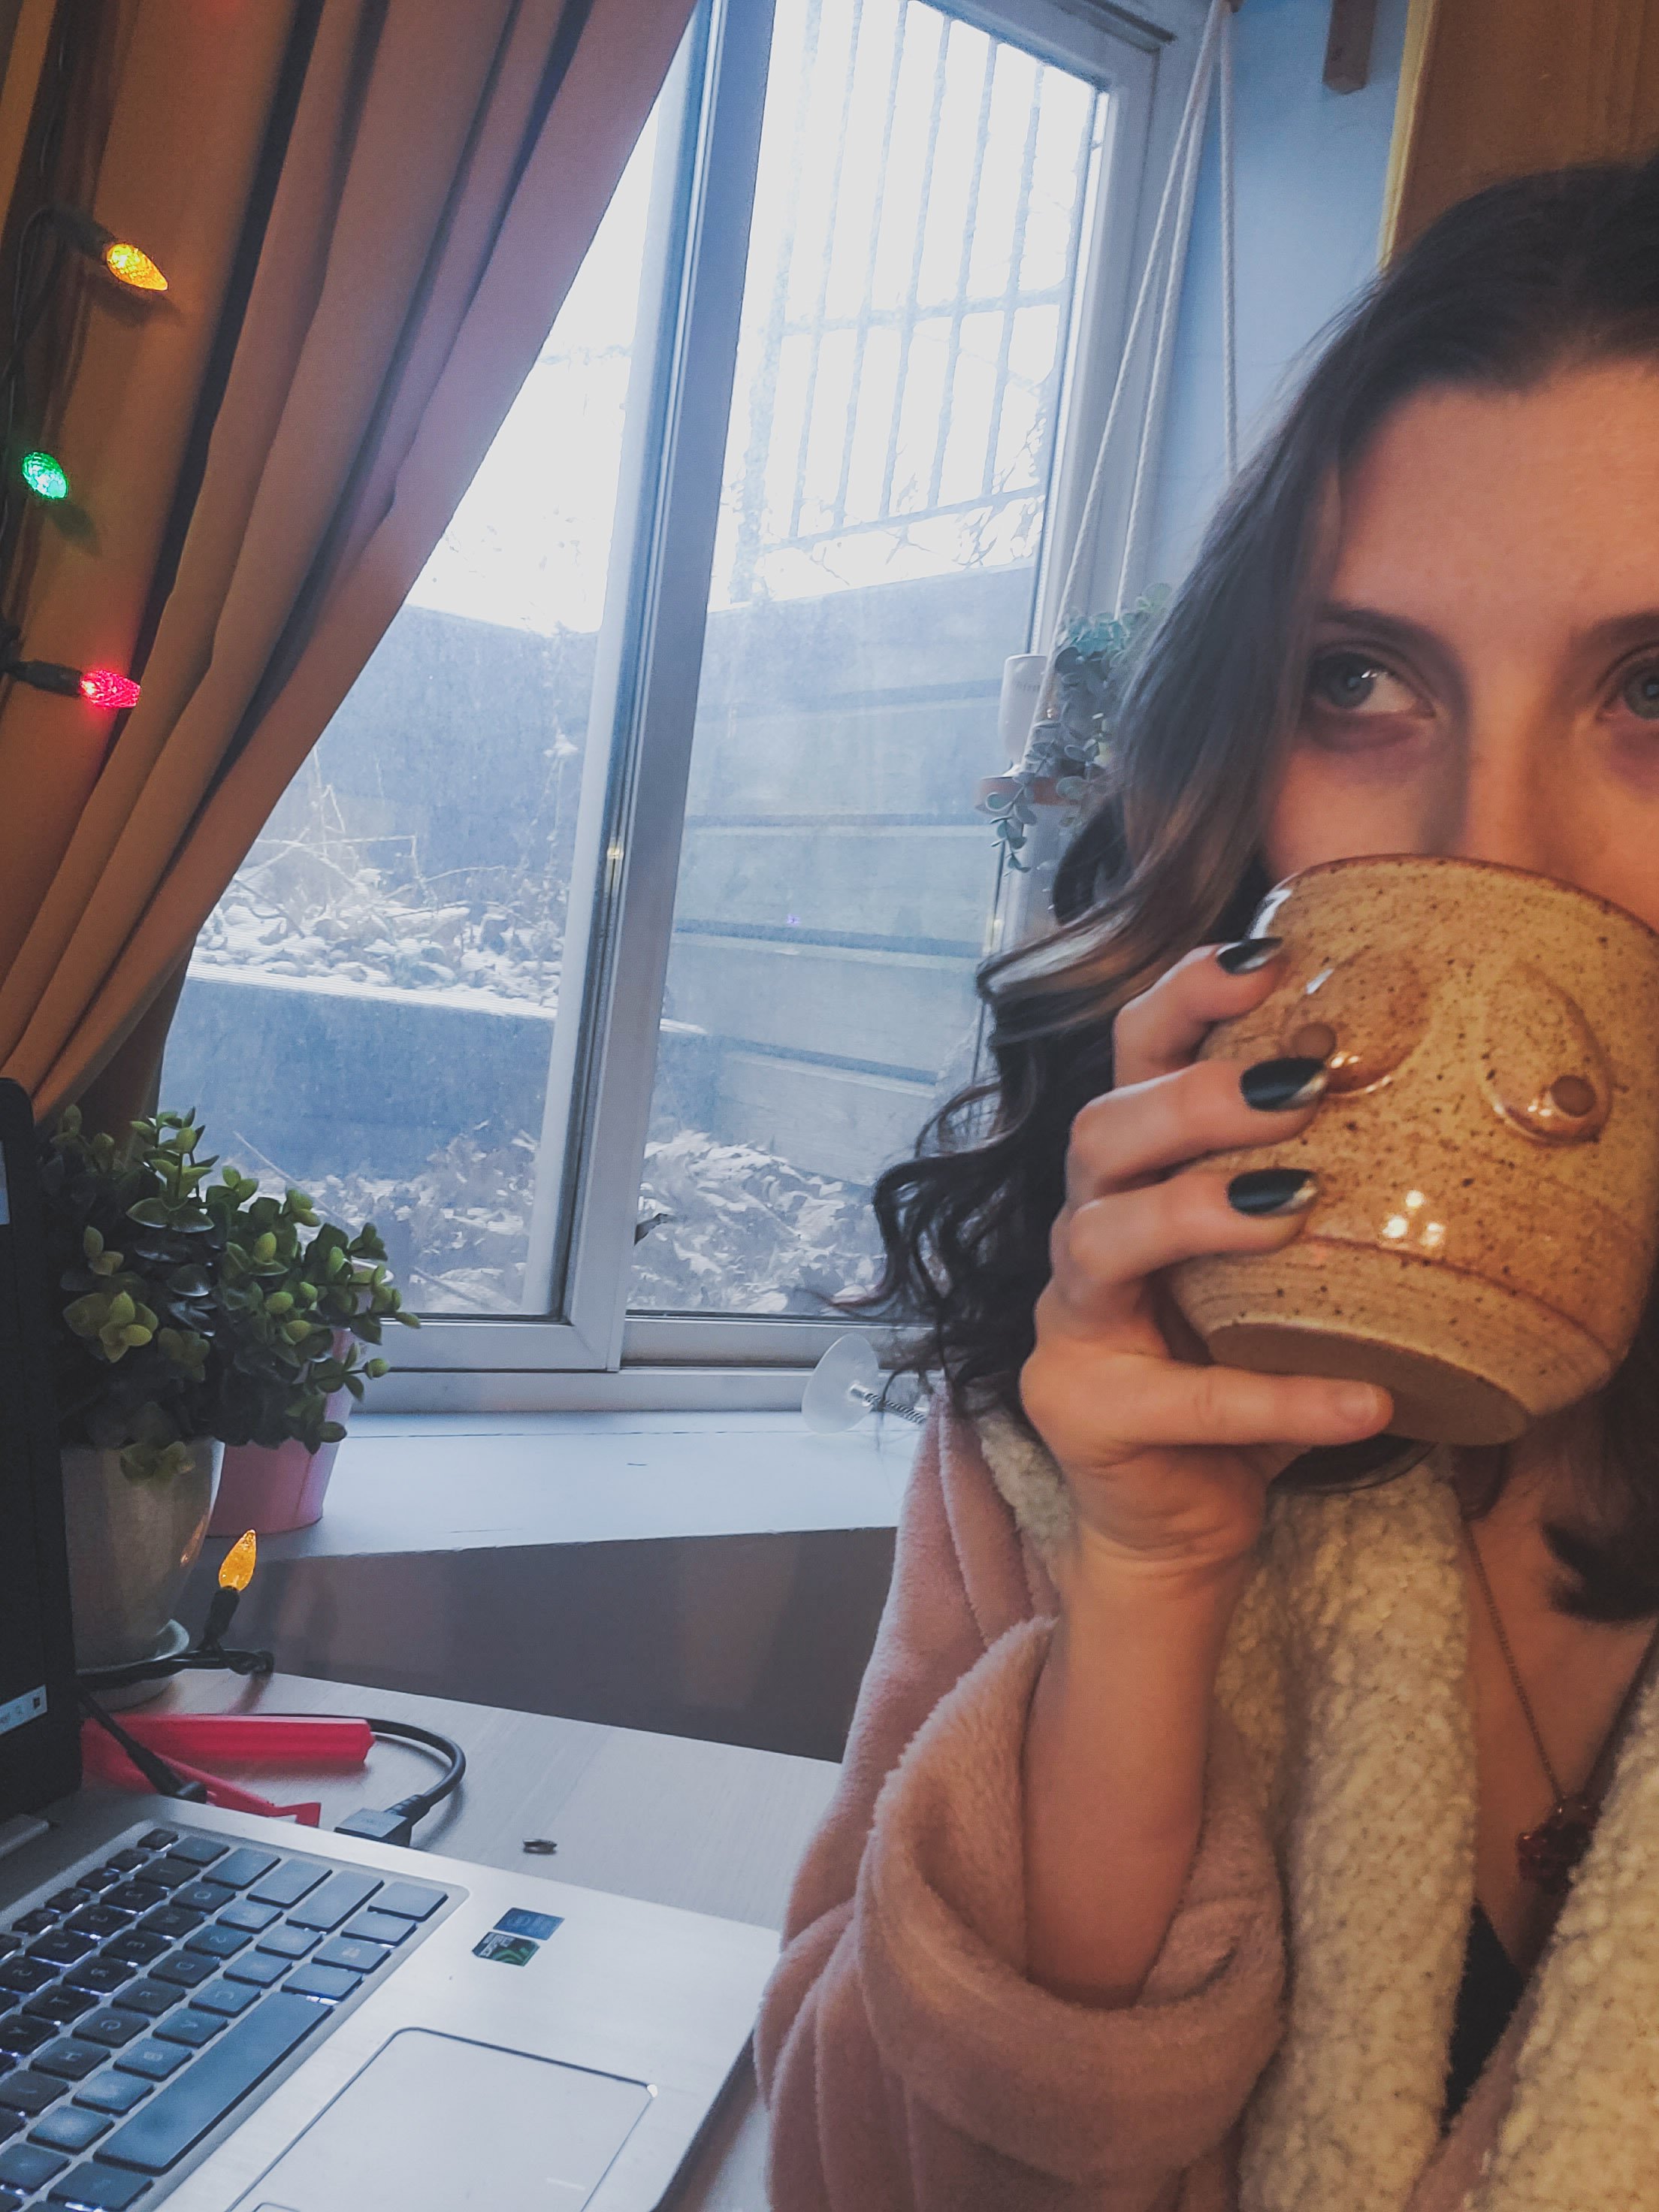  Just sipping from my new mug from our Friendmas exchange! 